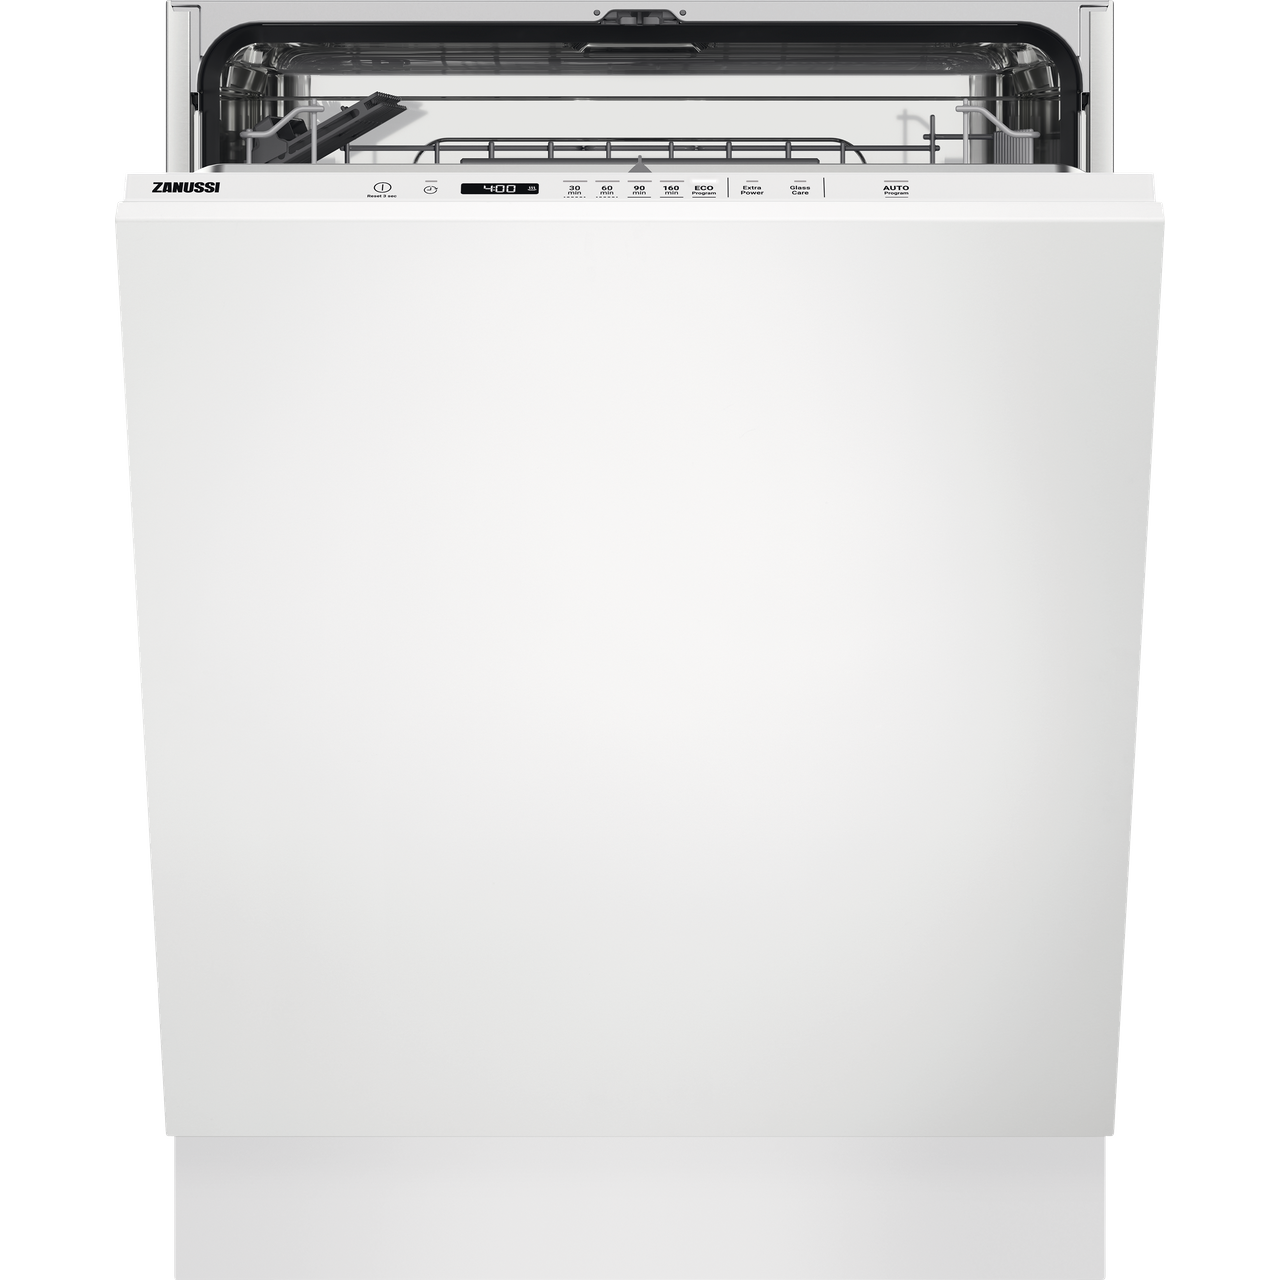 Zanussi ZDLN6531 Fully Integrated Standard Dishwasher Review